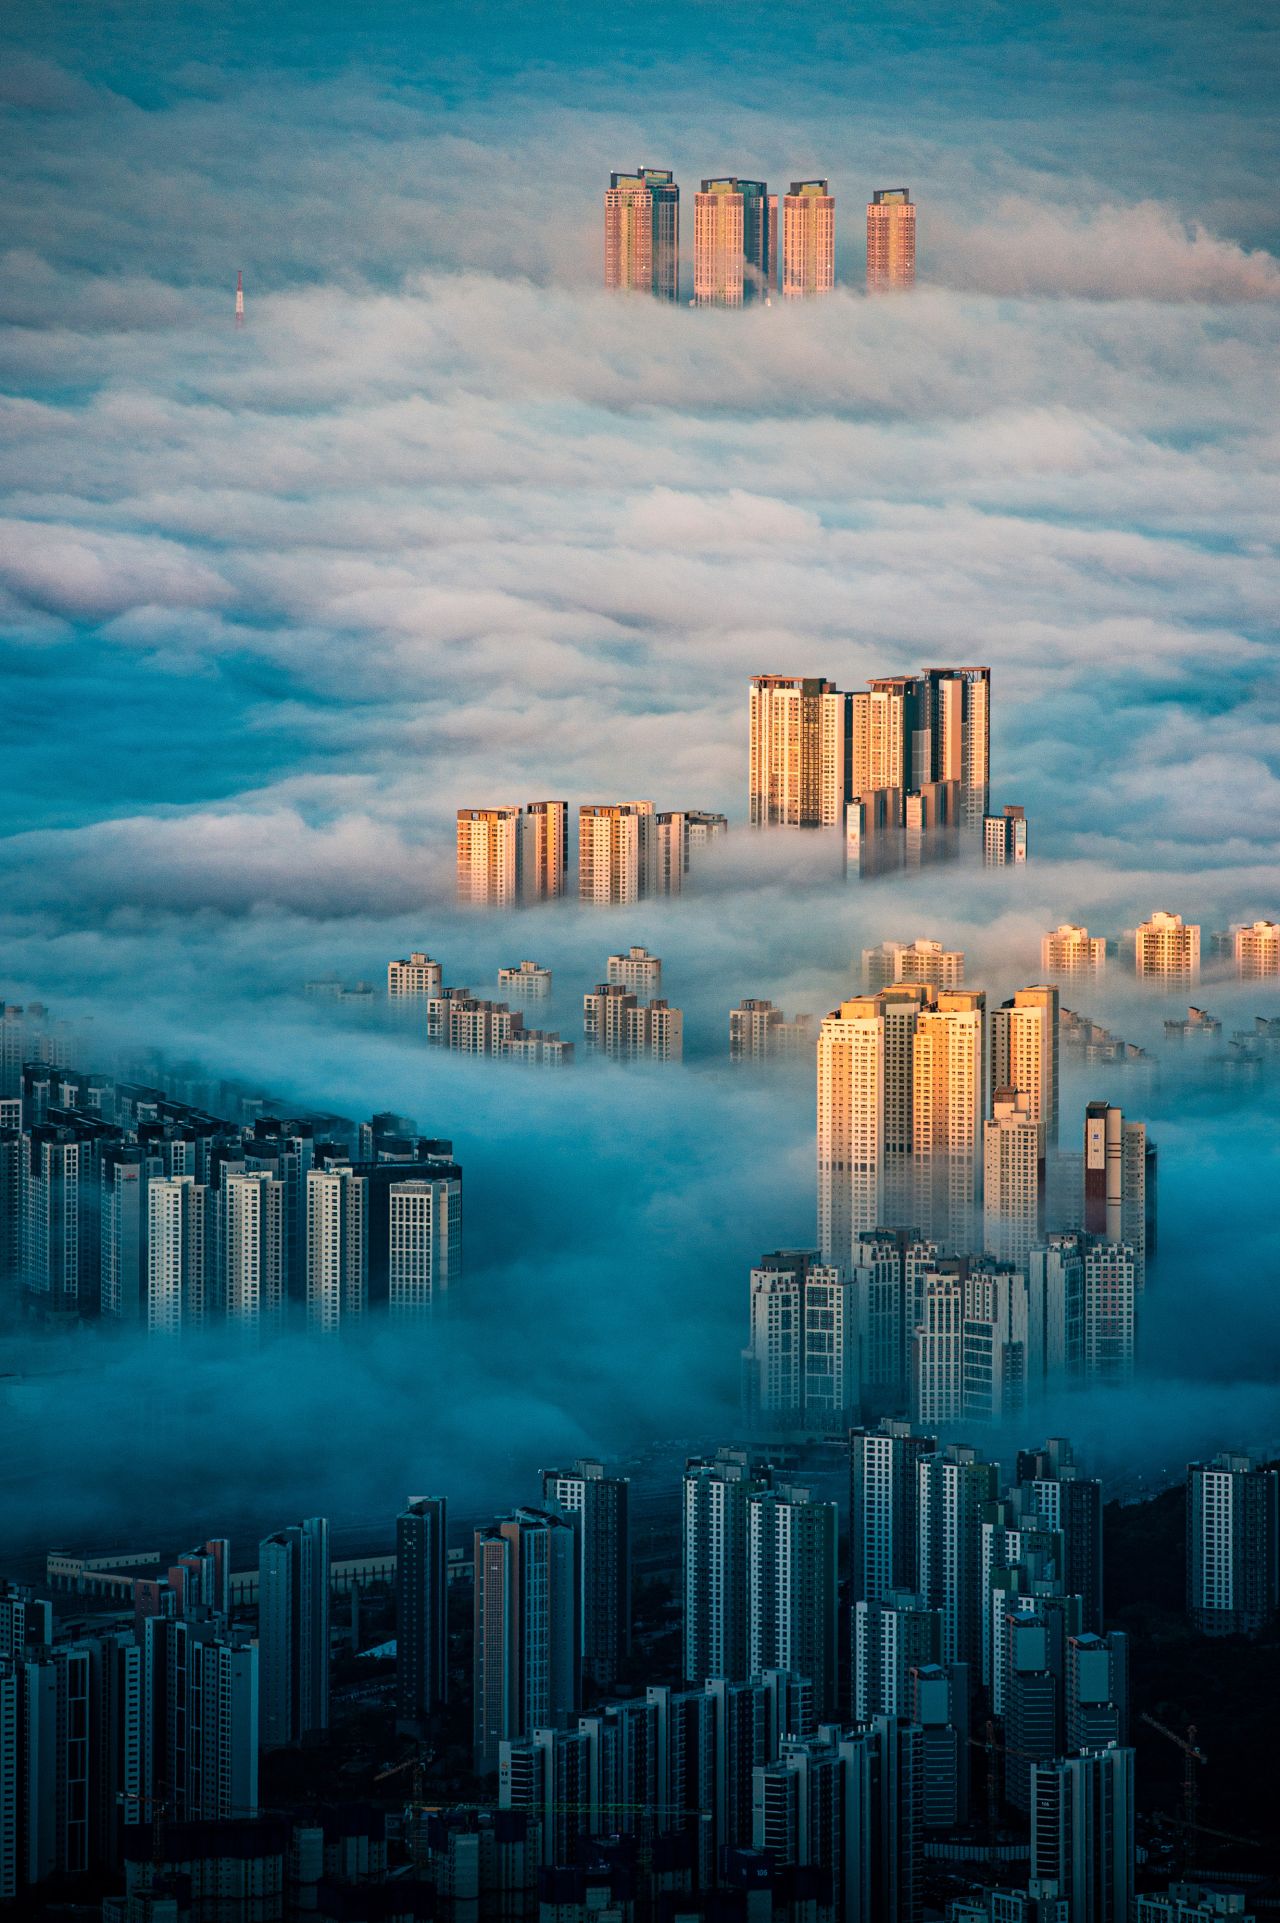 "A City Among the Clouds," by Wonyoung Choi captures the clouds snaking through the Bukhansan Mountain in Seoul, South Korea. 